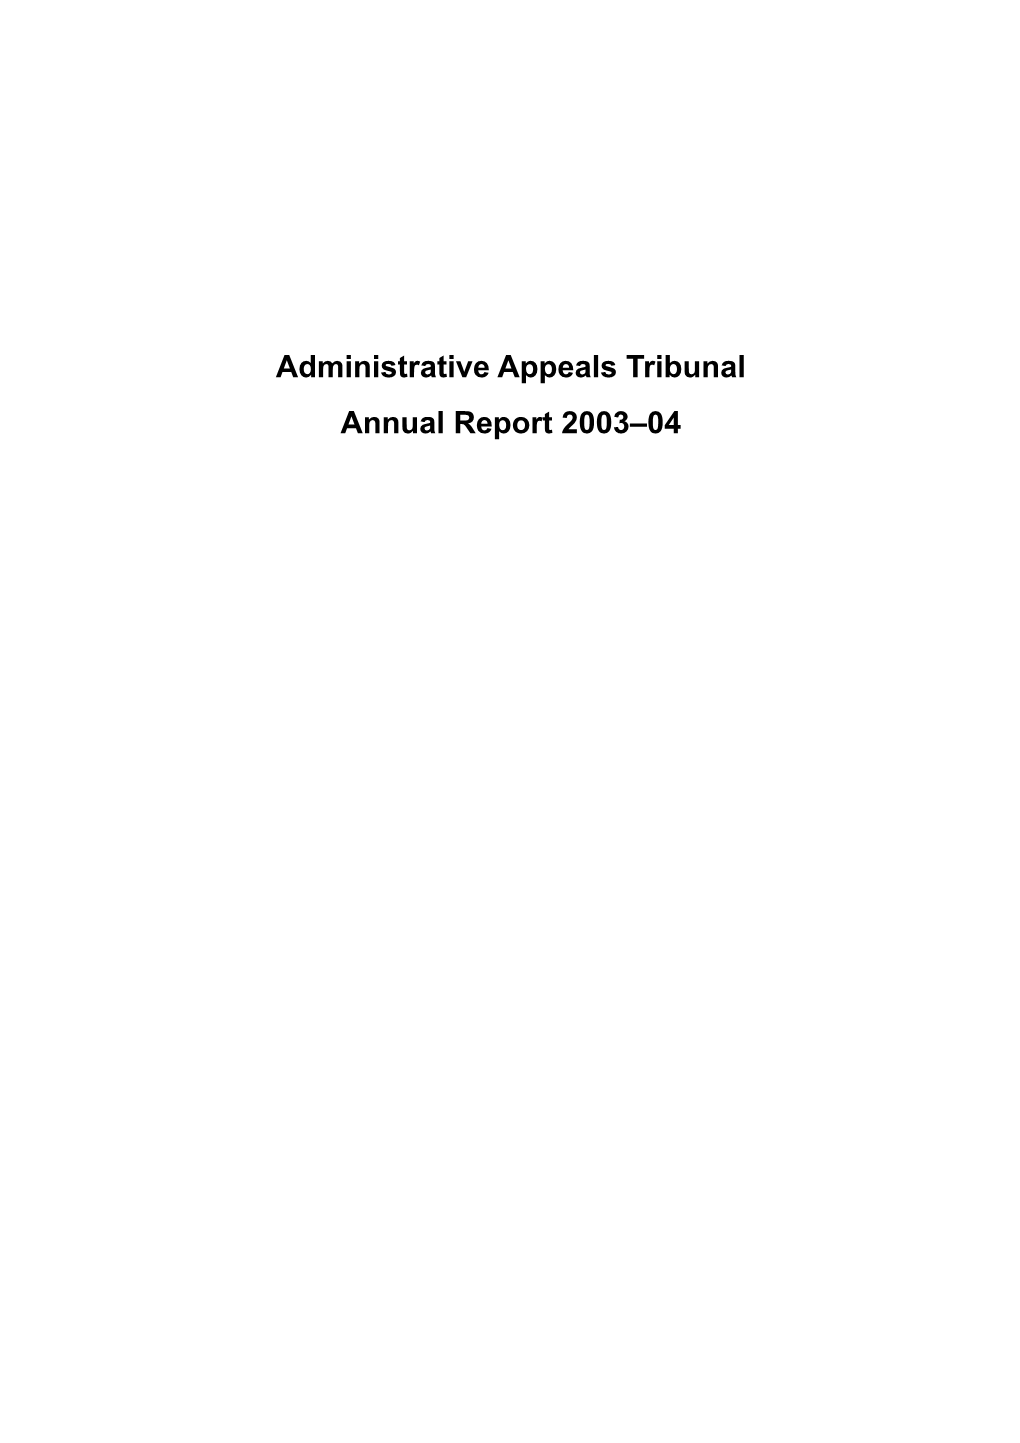 Annual Report 2003-04 Introductory Pages (Word Version)